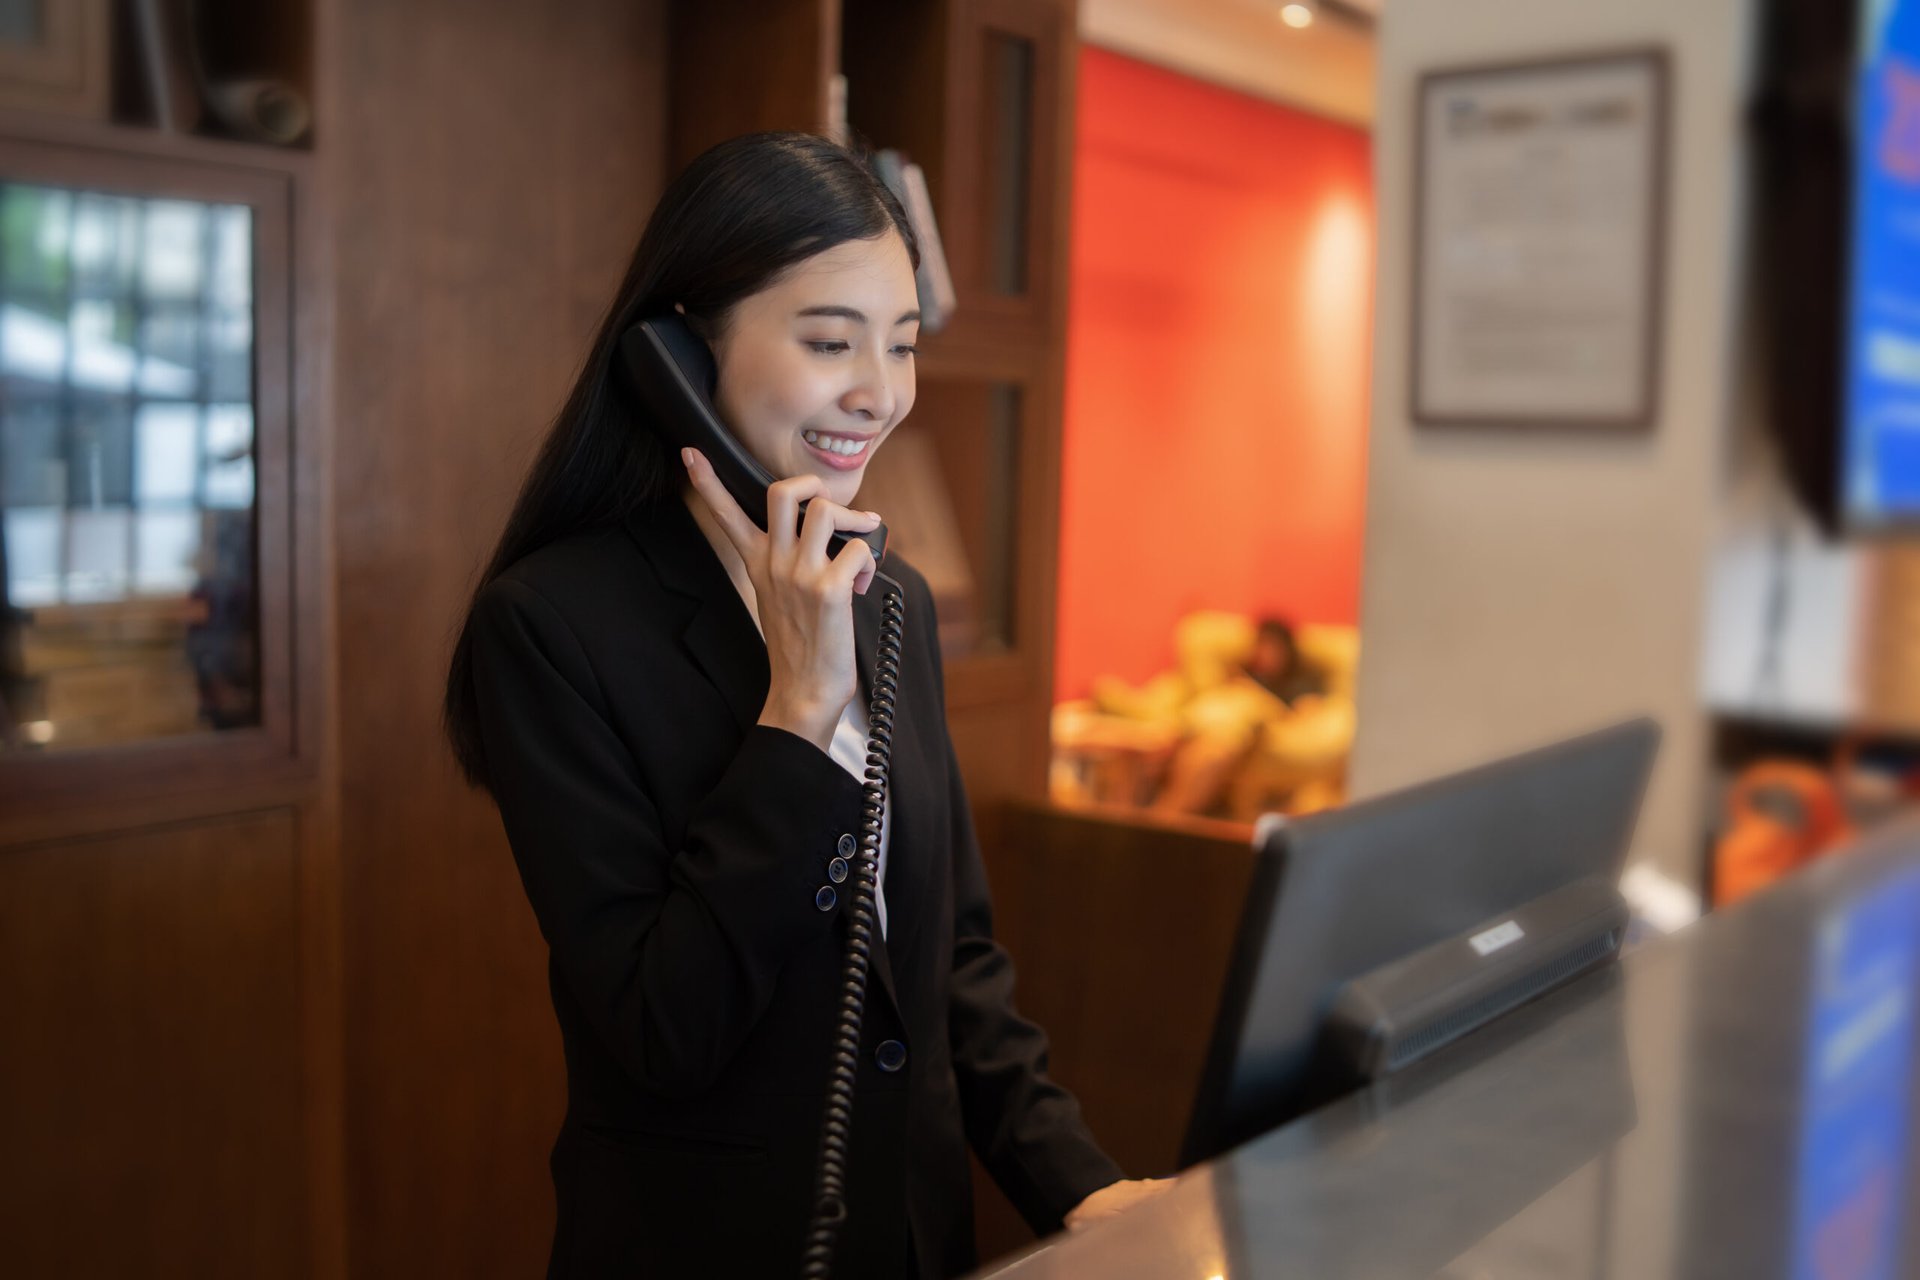 Front-desk worker at a hotel